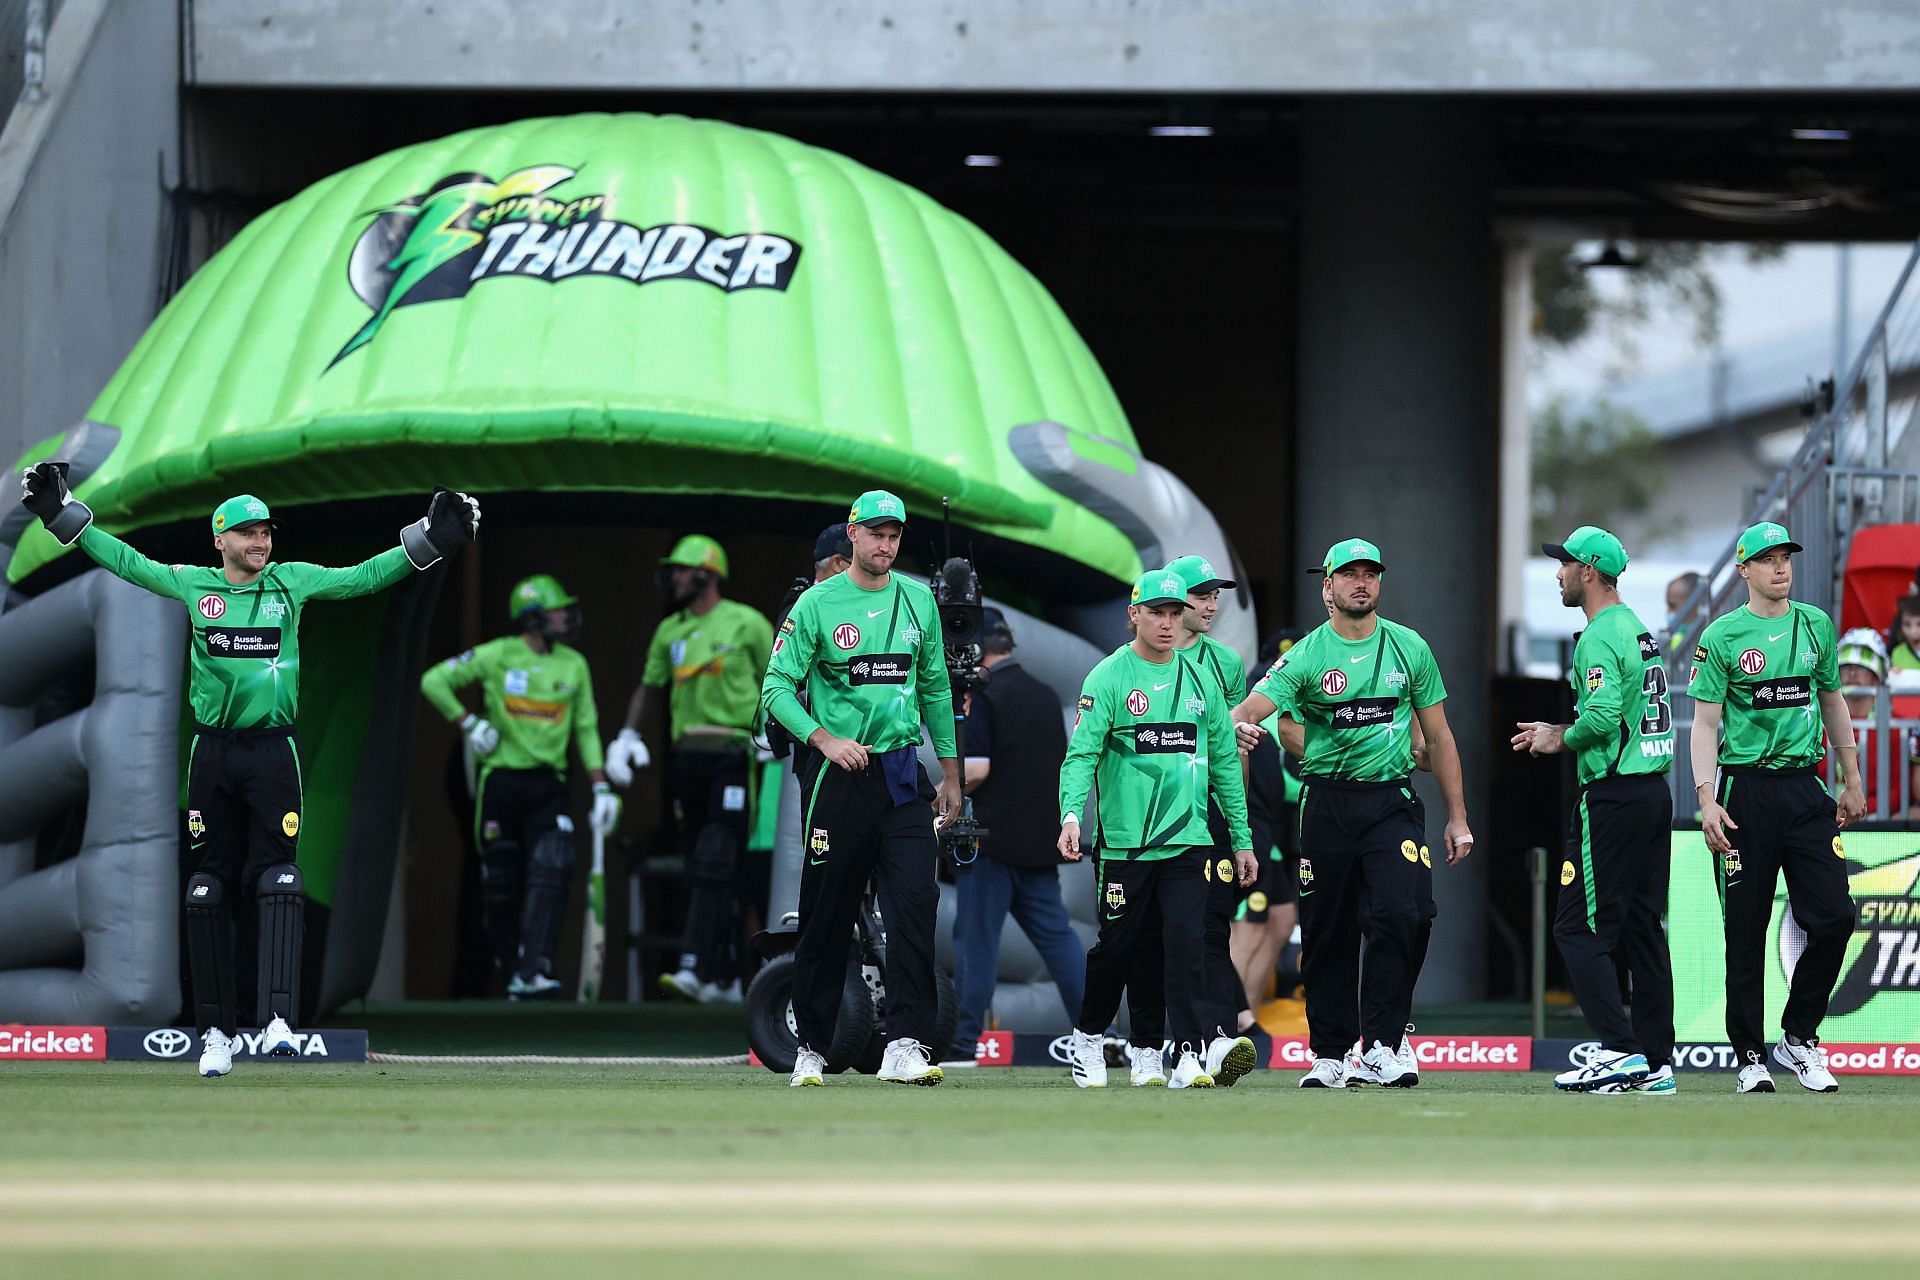 A coaching staff member of Melbourne Stars tested positive